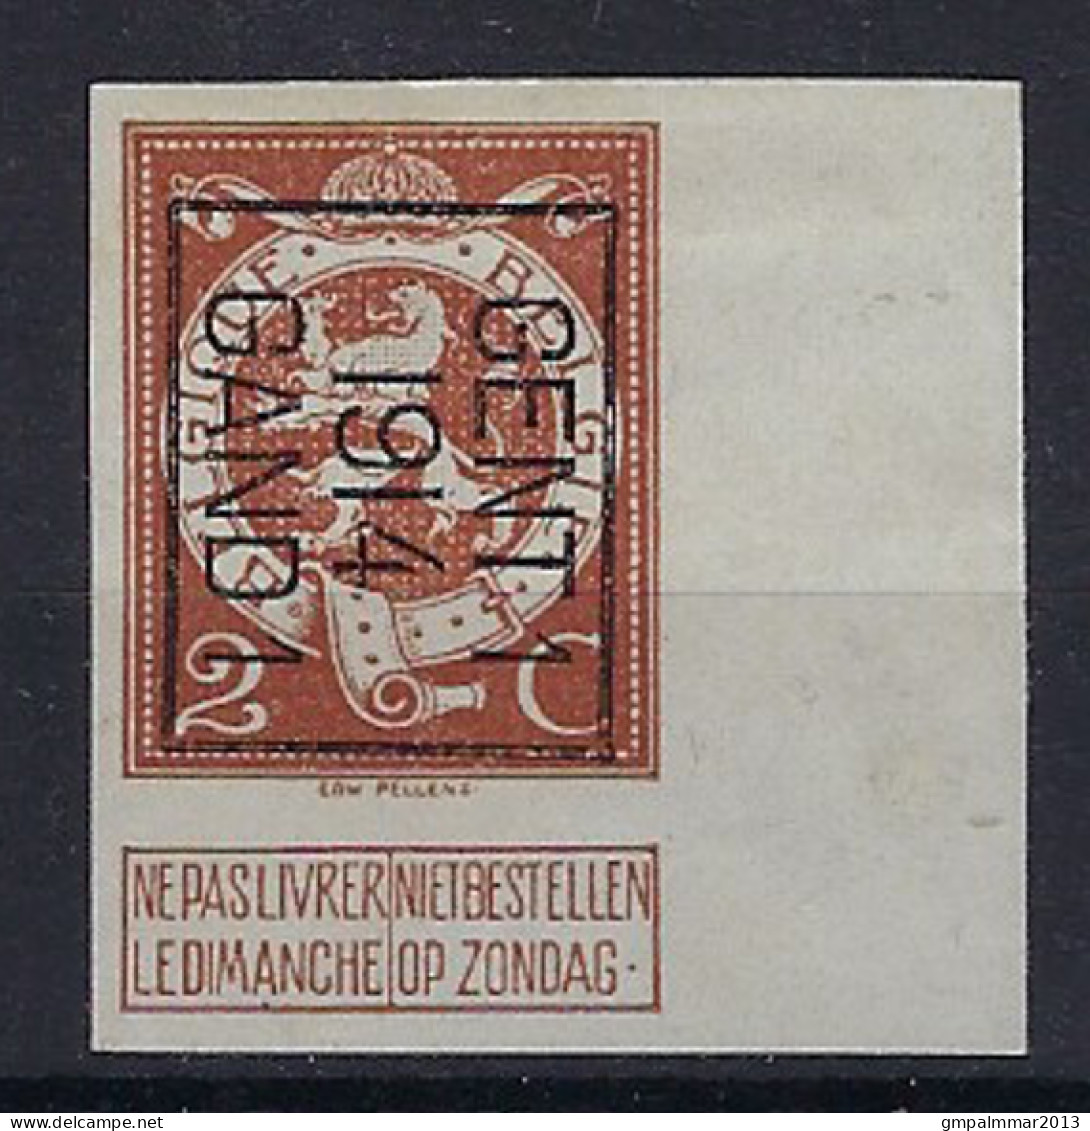 Nr. 109  Typo 51 B GENT I 1914 GAND I - ONGETAND / NON DENTELEE (*)   ; Staat Zie Scan ! - Typos 1912-14 (Lion)